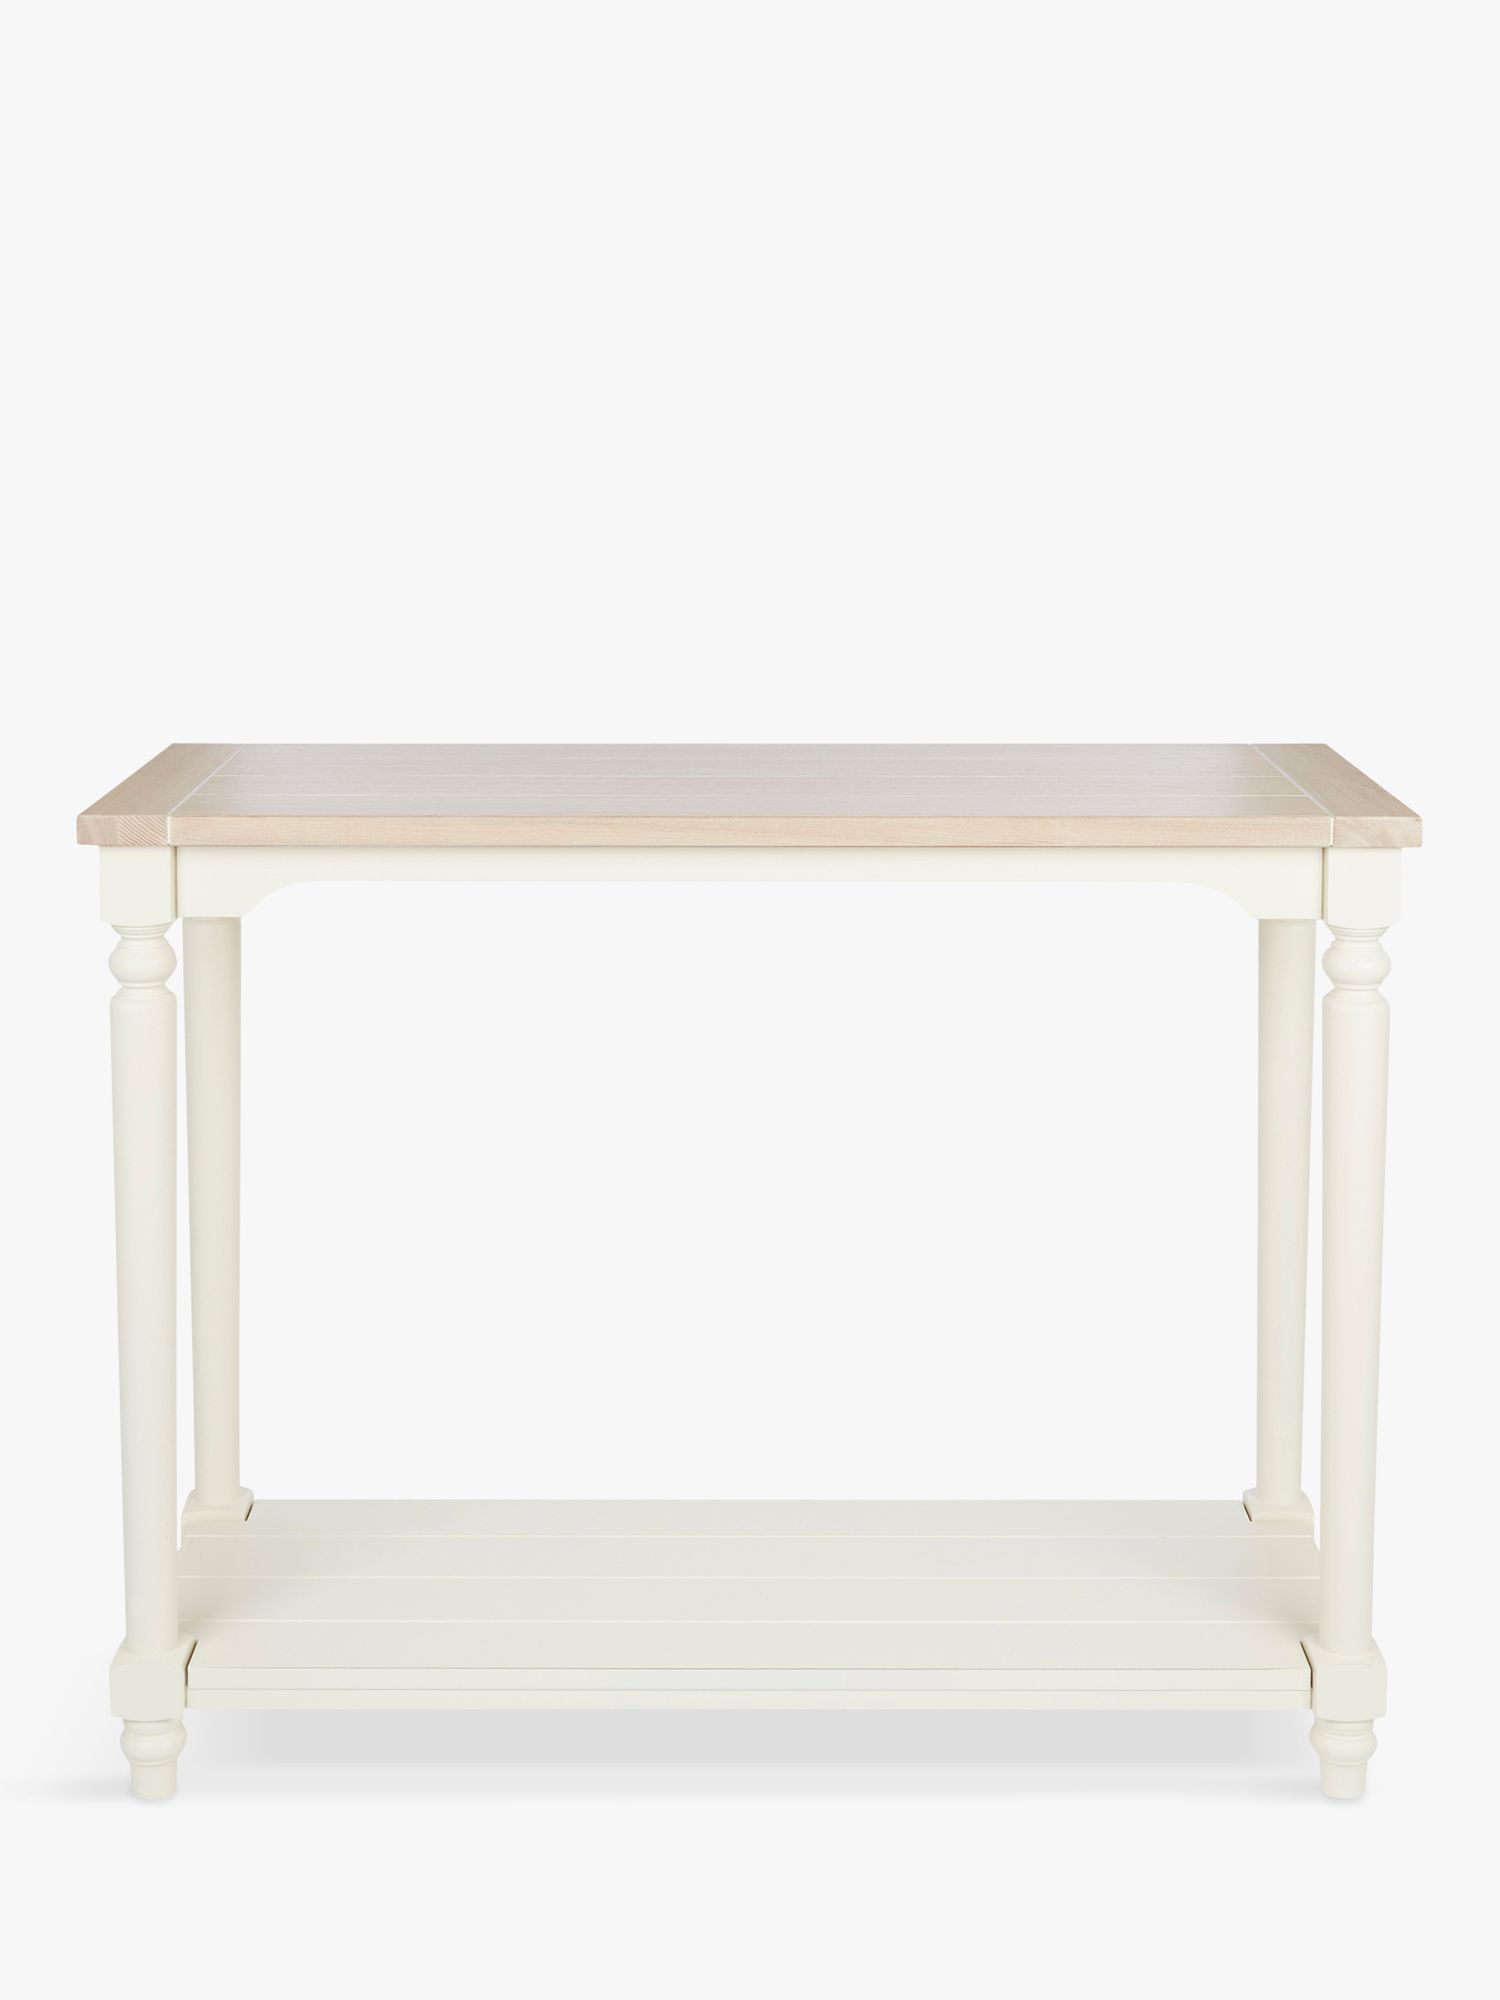 Photo of Laura ashley dorset console table white/natural